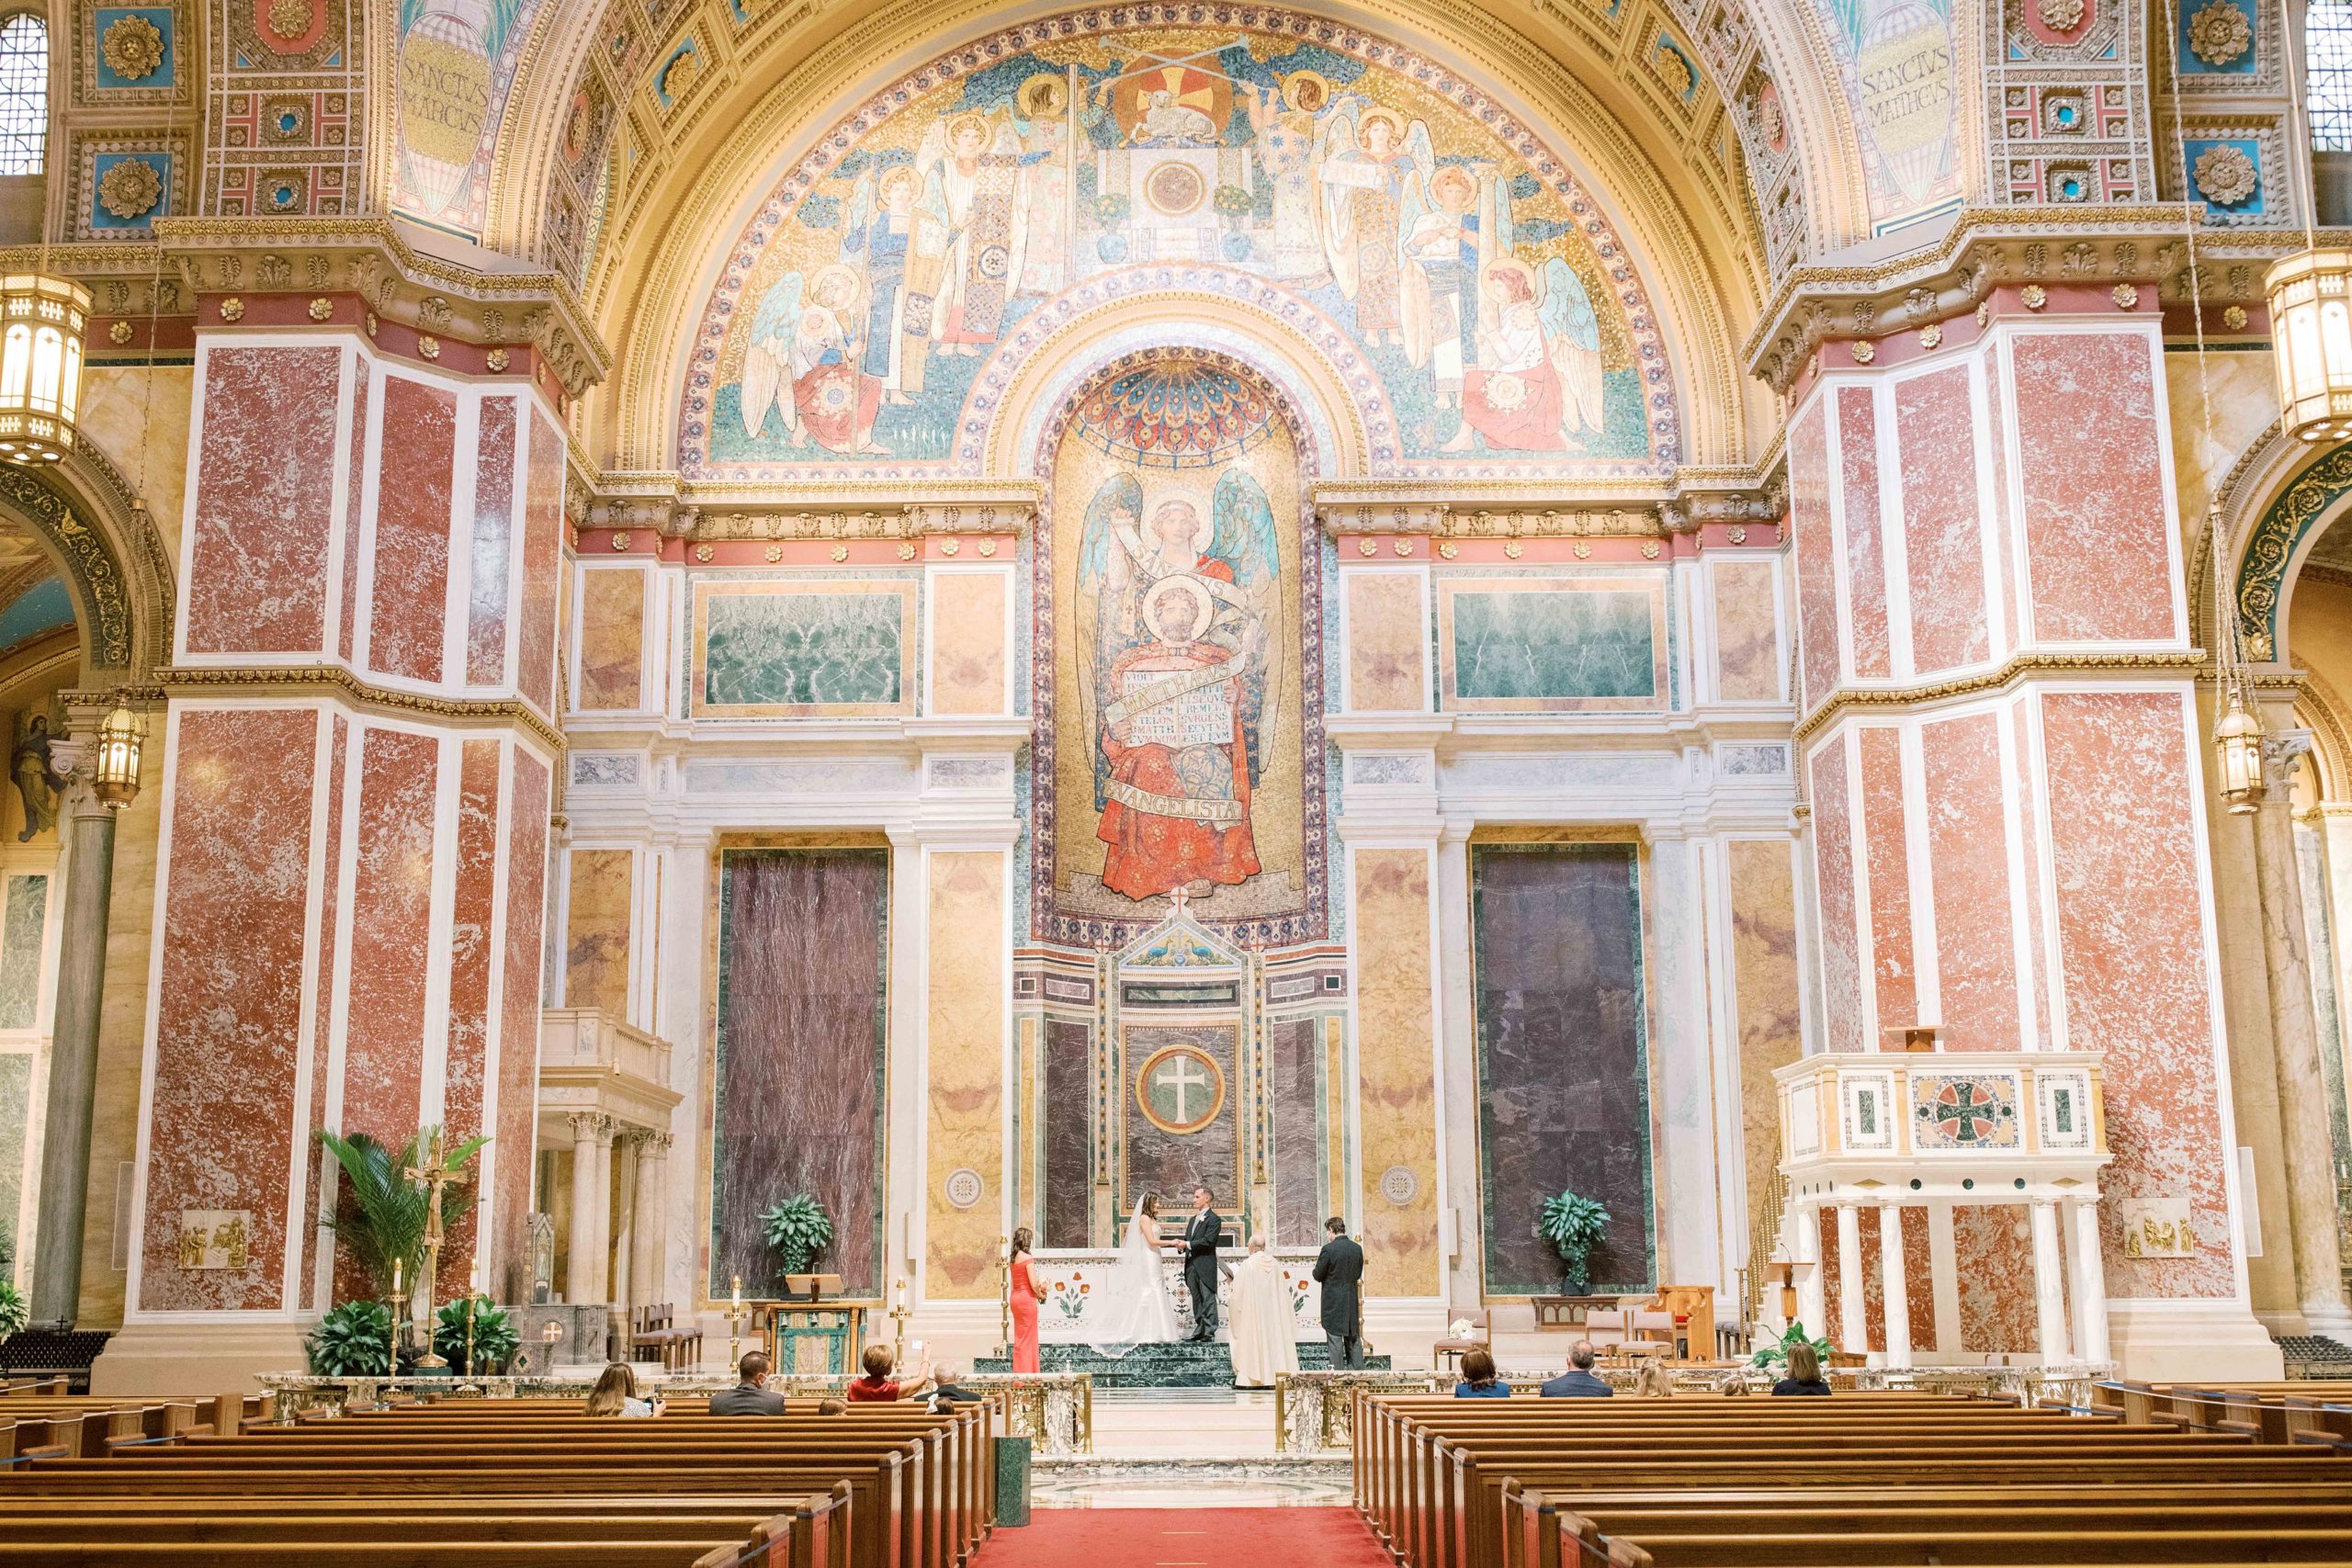 A romantic elopement wedding at St. Matthews Cathedral in Washington, DC with portraits at the DC War Memorial and Lincoln Memorial.